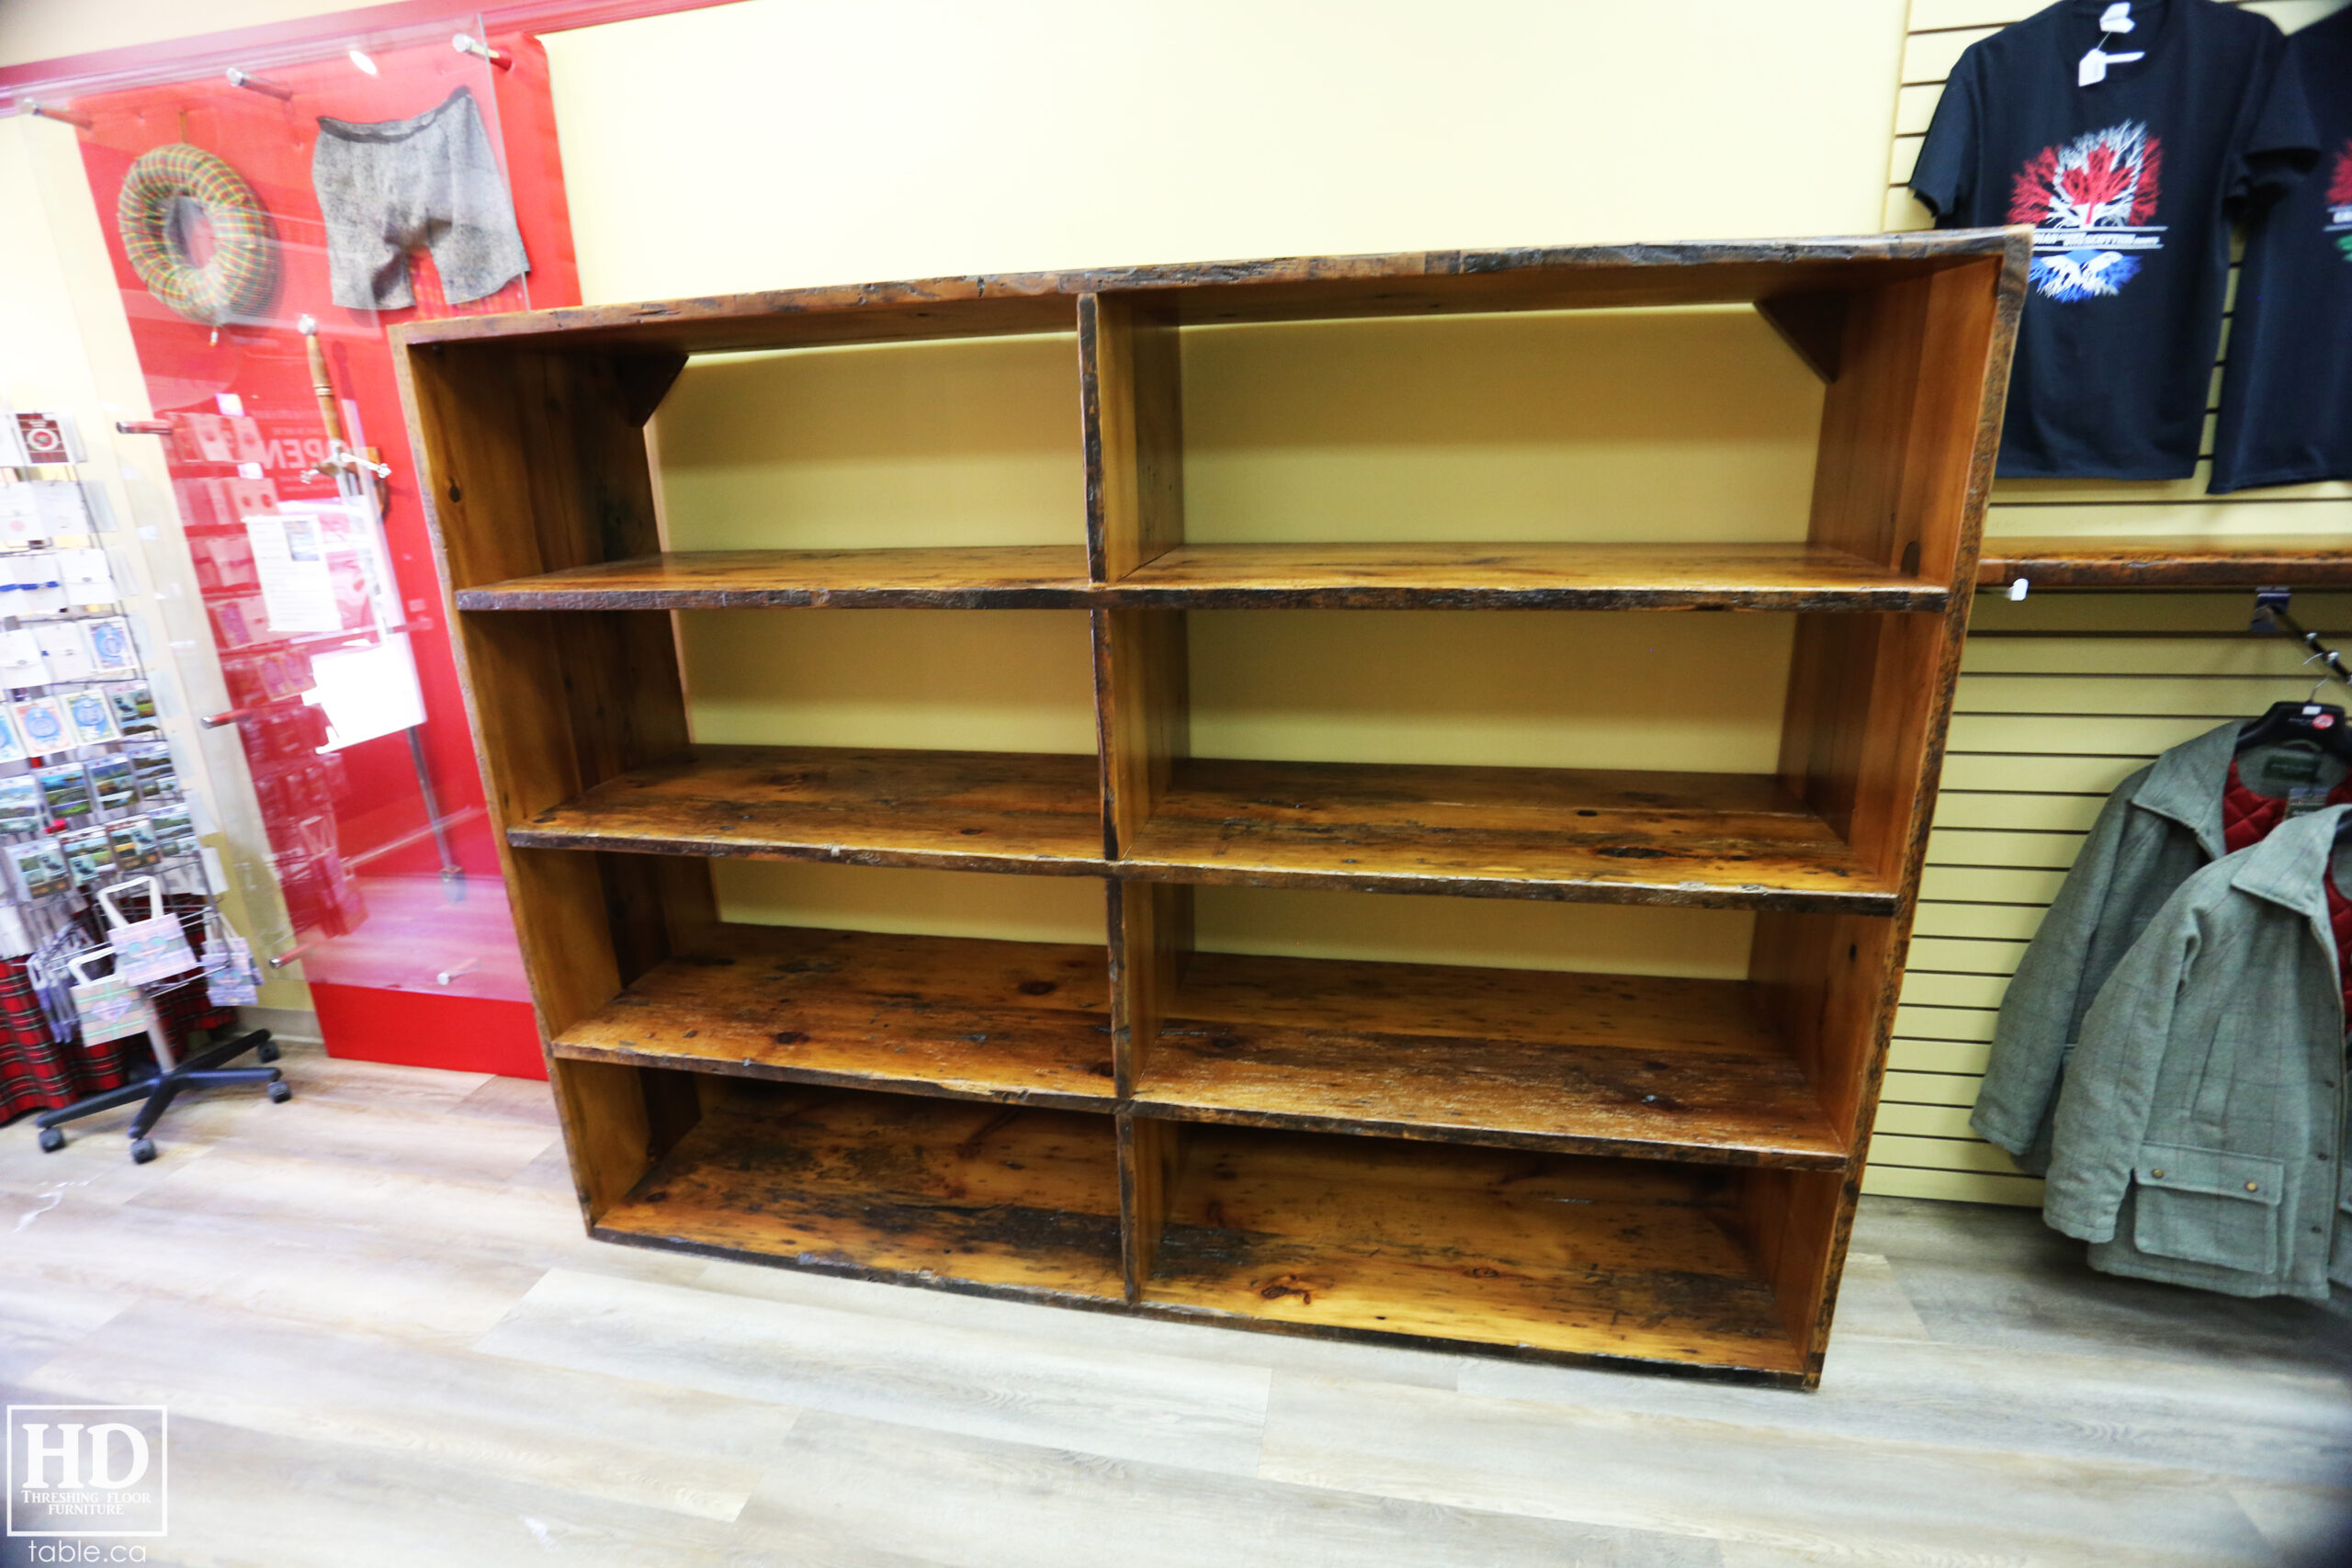 Reclaimed Wood Shelving Unit for a Retail Store made from Ontario Barnwood by HD Threshing Floor Furniture / www.table.ca